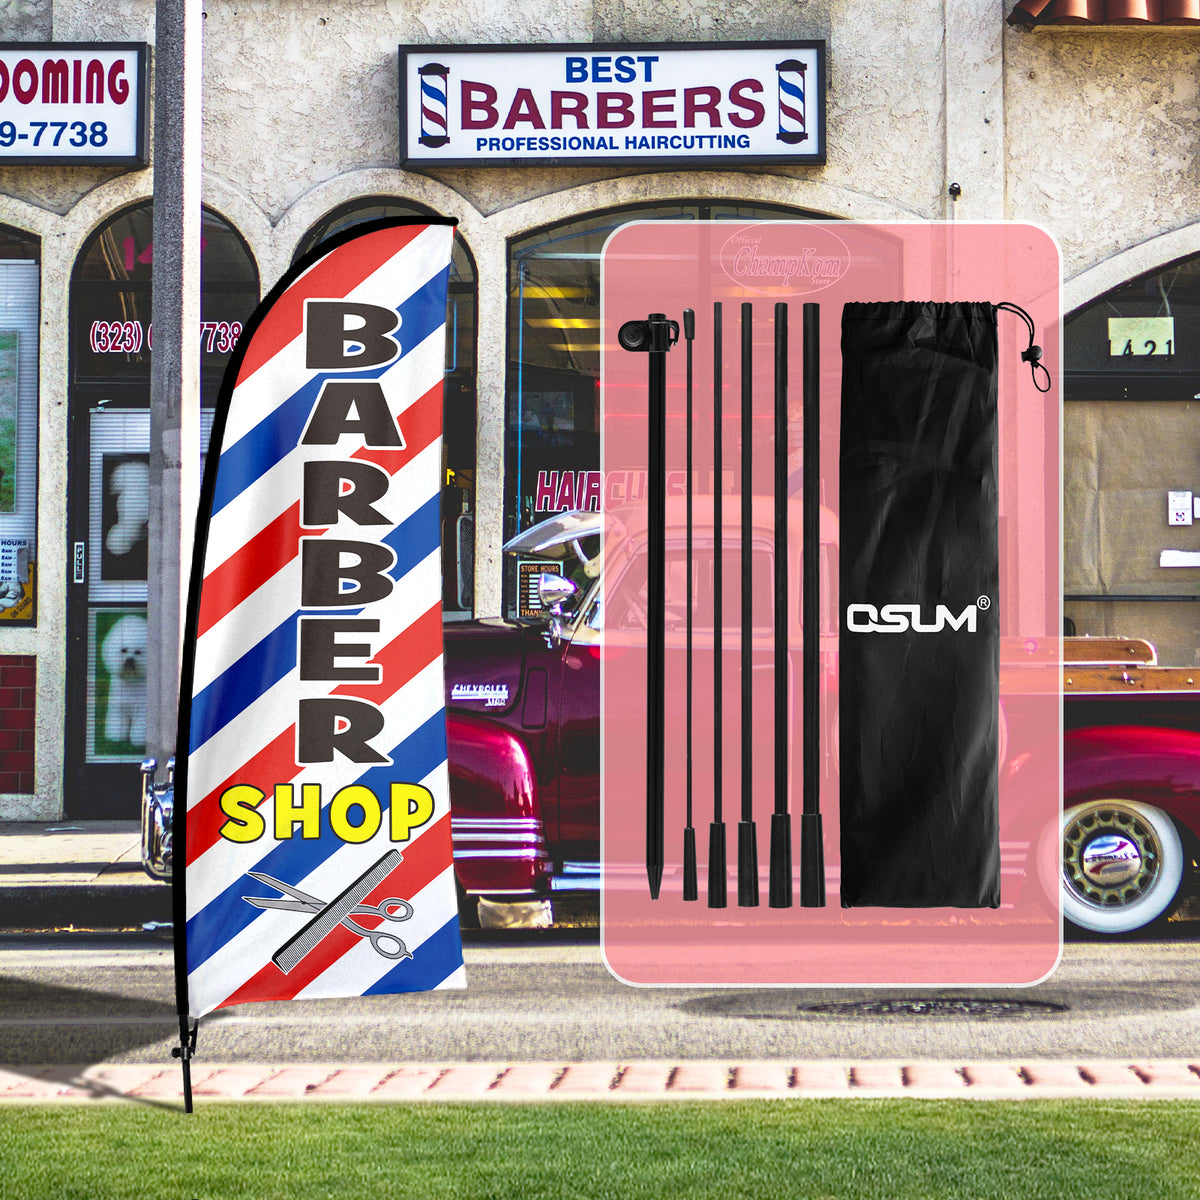 QSUM Barbershop Themed Swooper Flag, 7FT Barbershop Banner Feather Flag with Carbon Fiber Pole Kit/Ground Stake, Barbershop Signs for Business Advertising